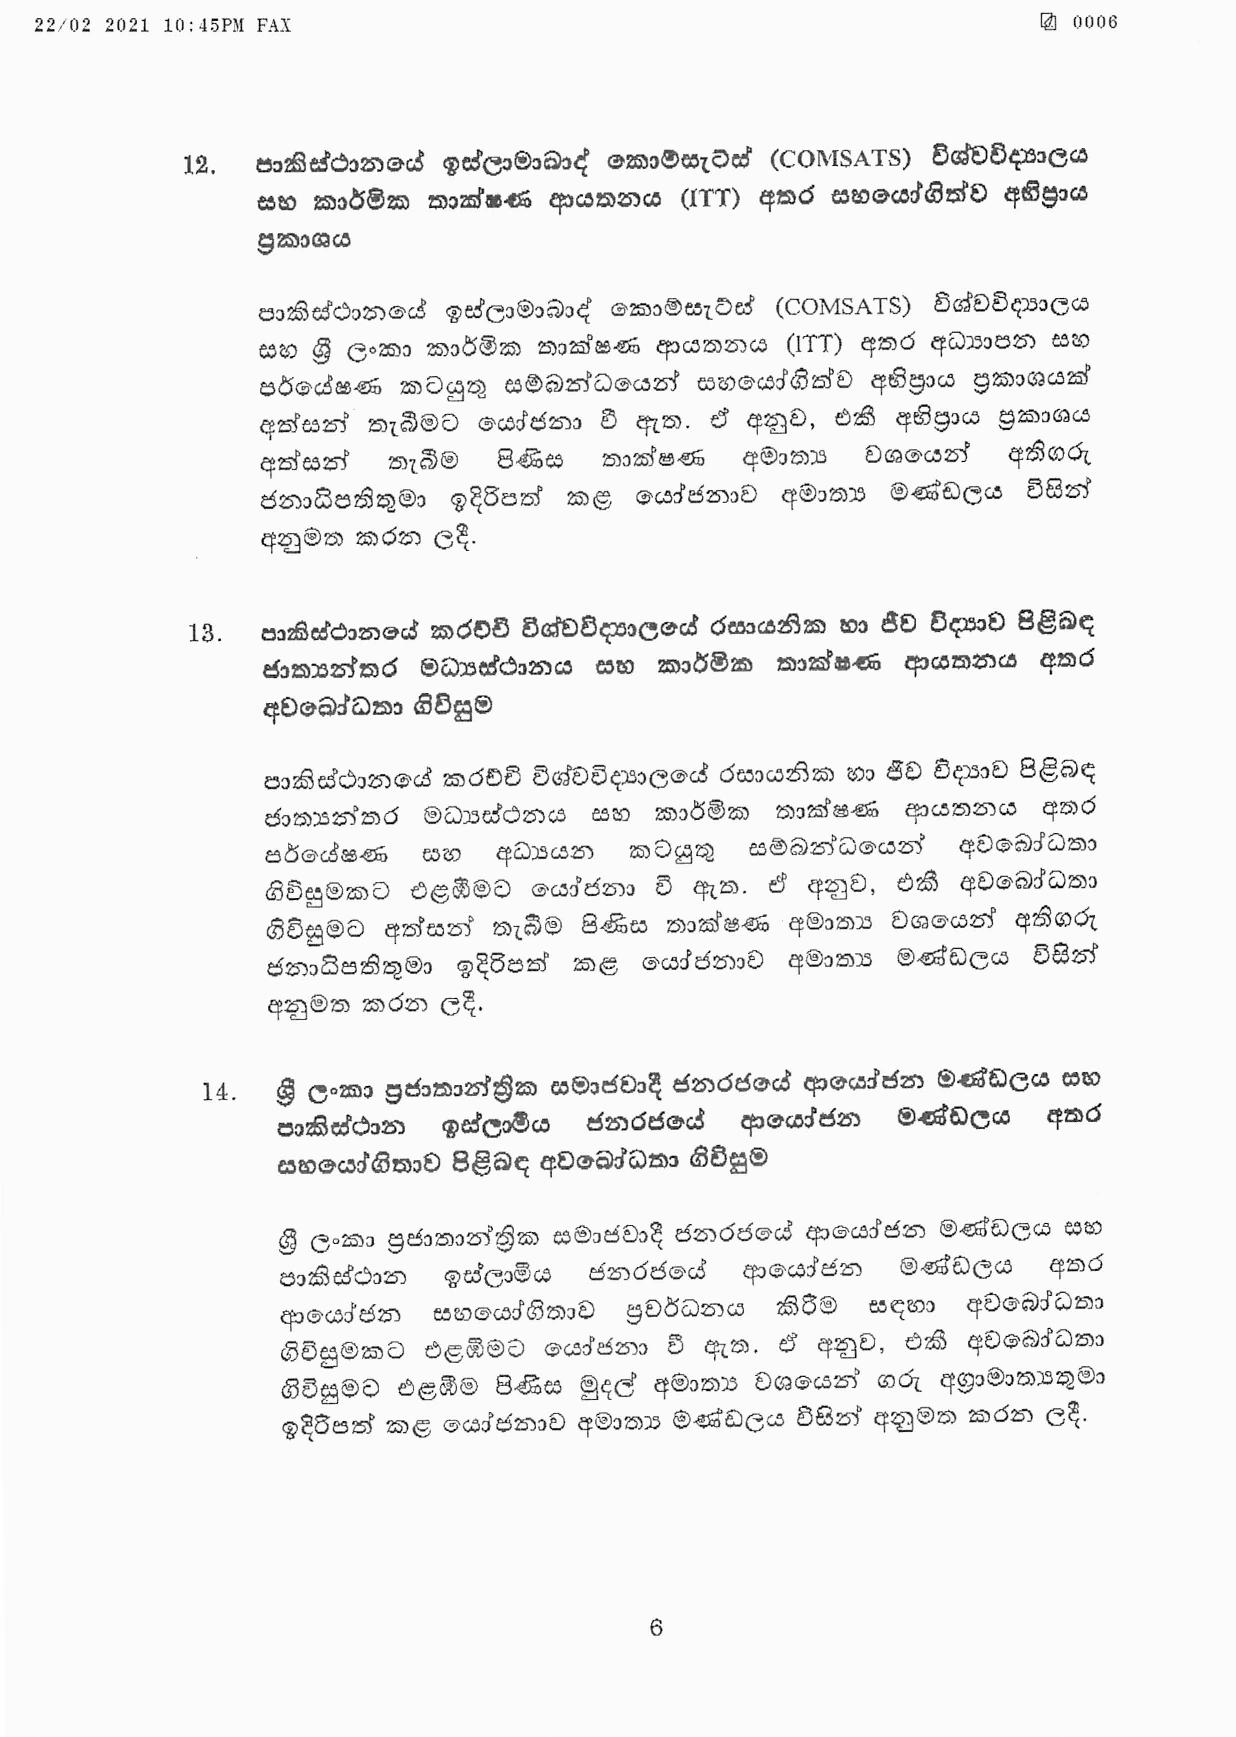 Cabinet Decision on 22.02.2021 page 006